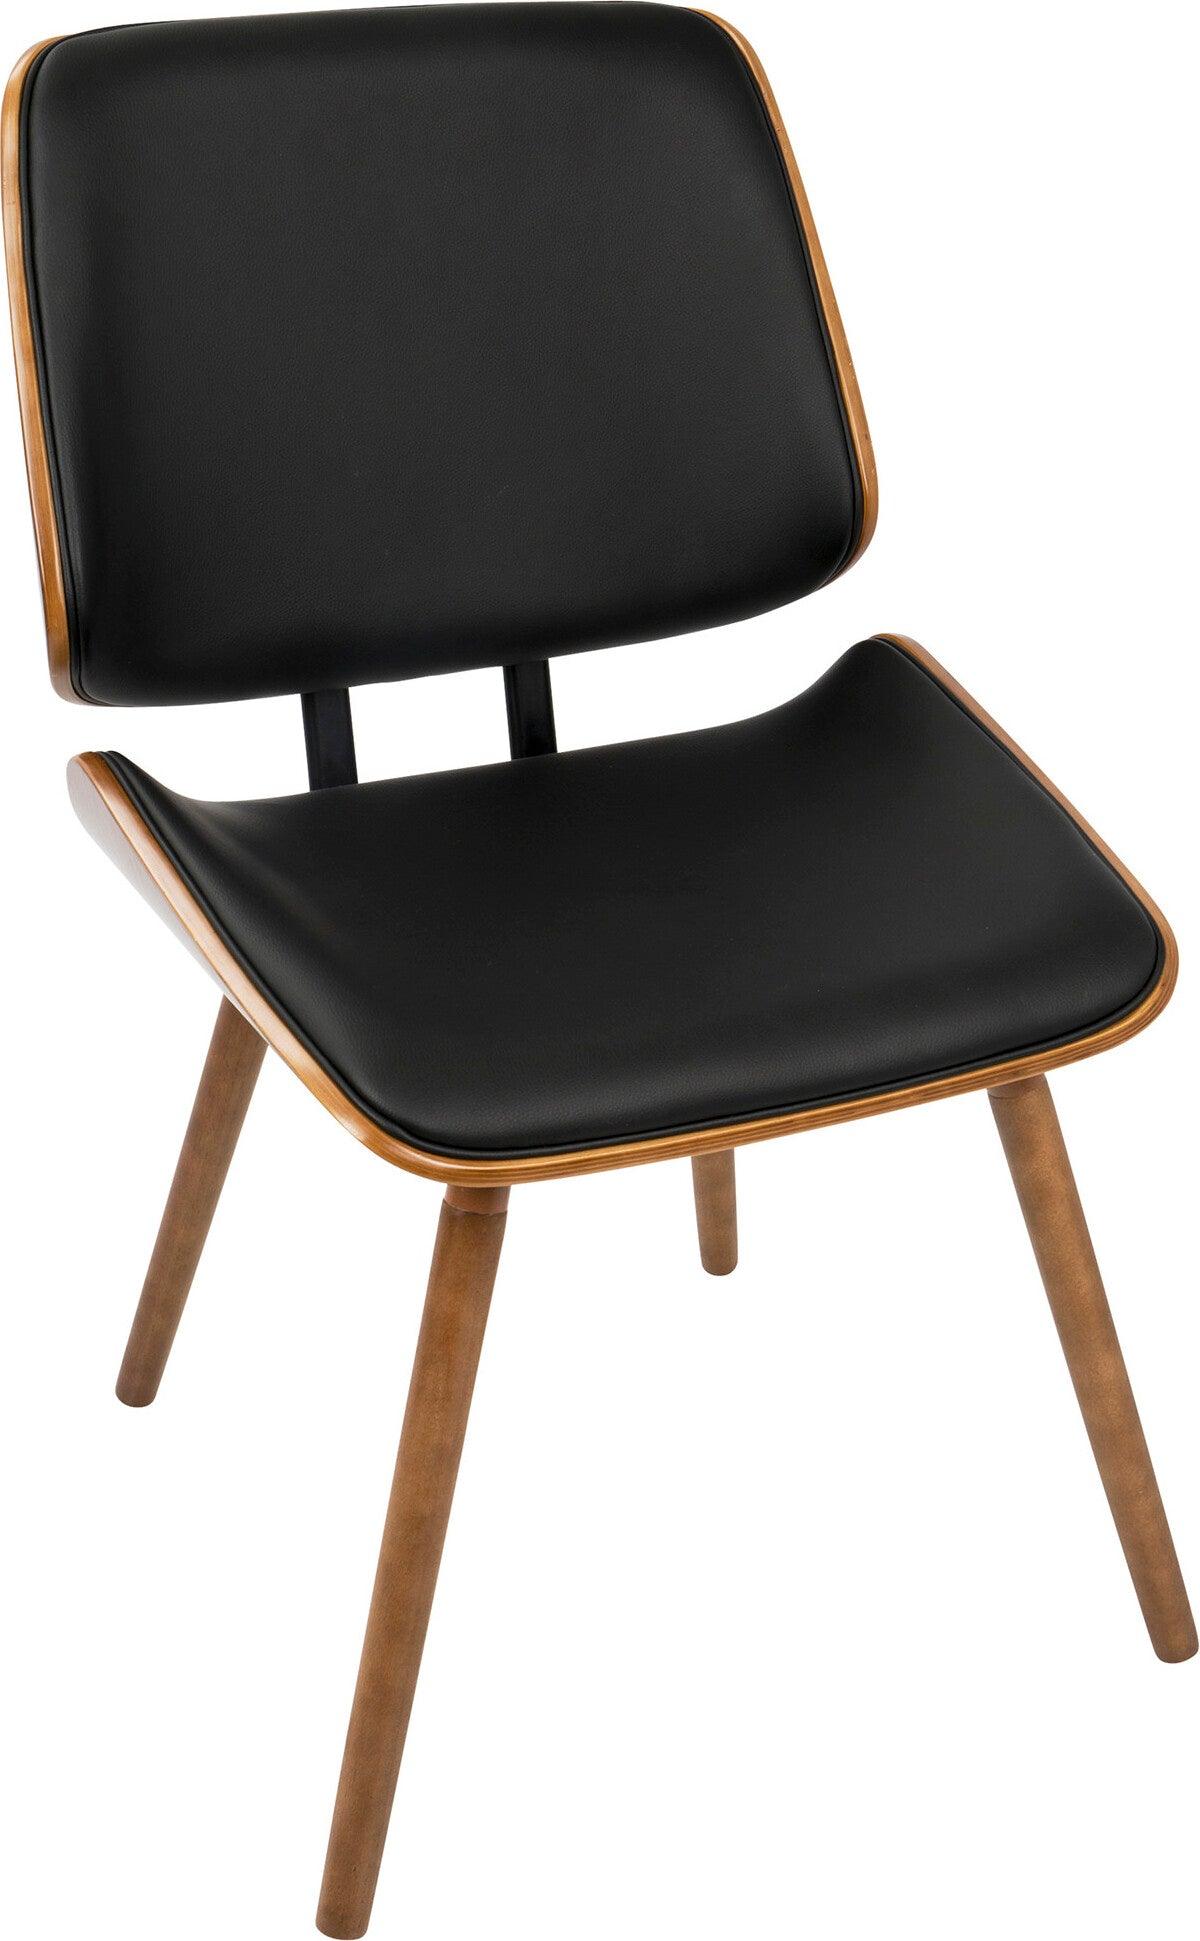 Lumisource Kitchen & Dining - Lombardi Mid-Century Modern Dining/Accent Chair in Walnut with Black Faux Leather (Set of 2)